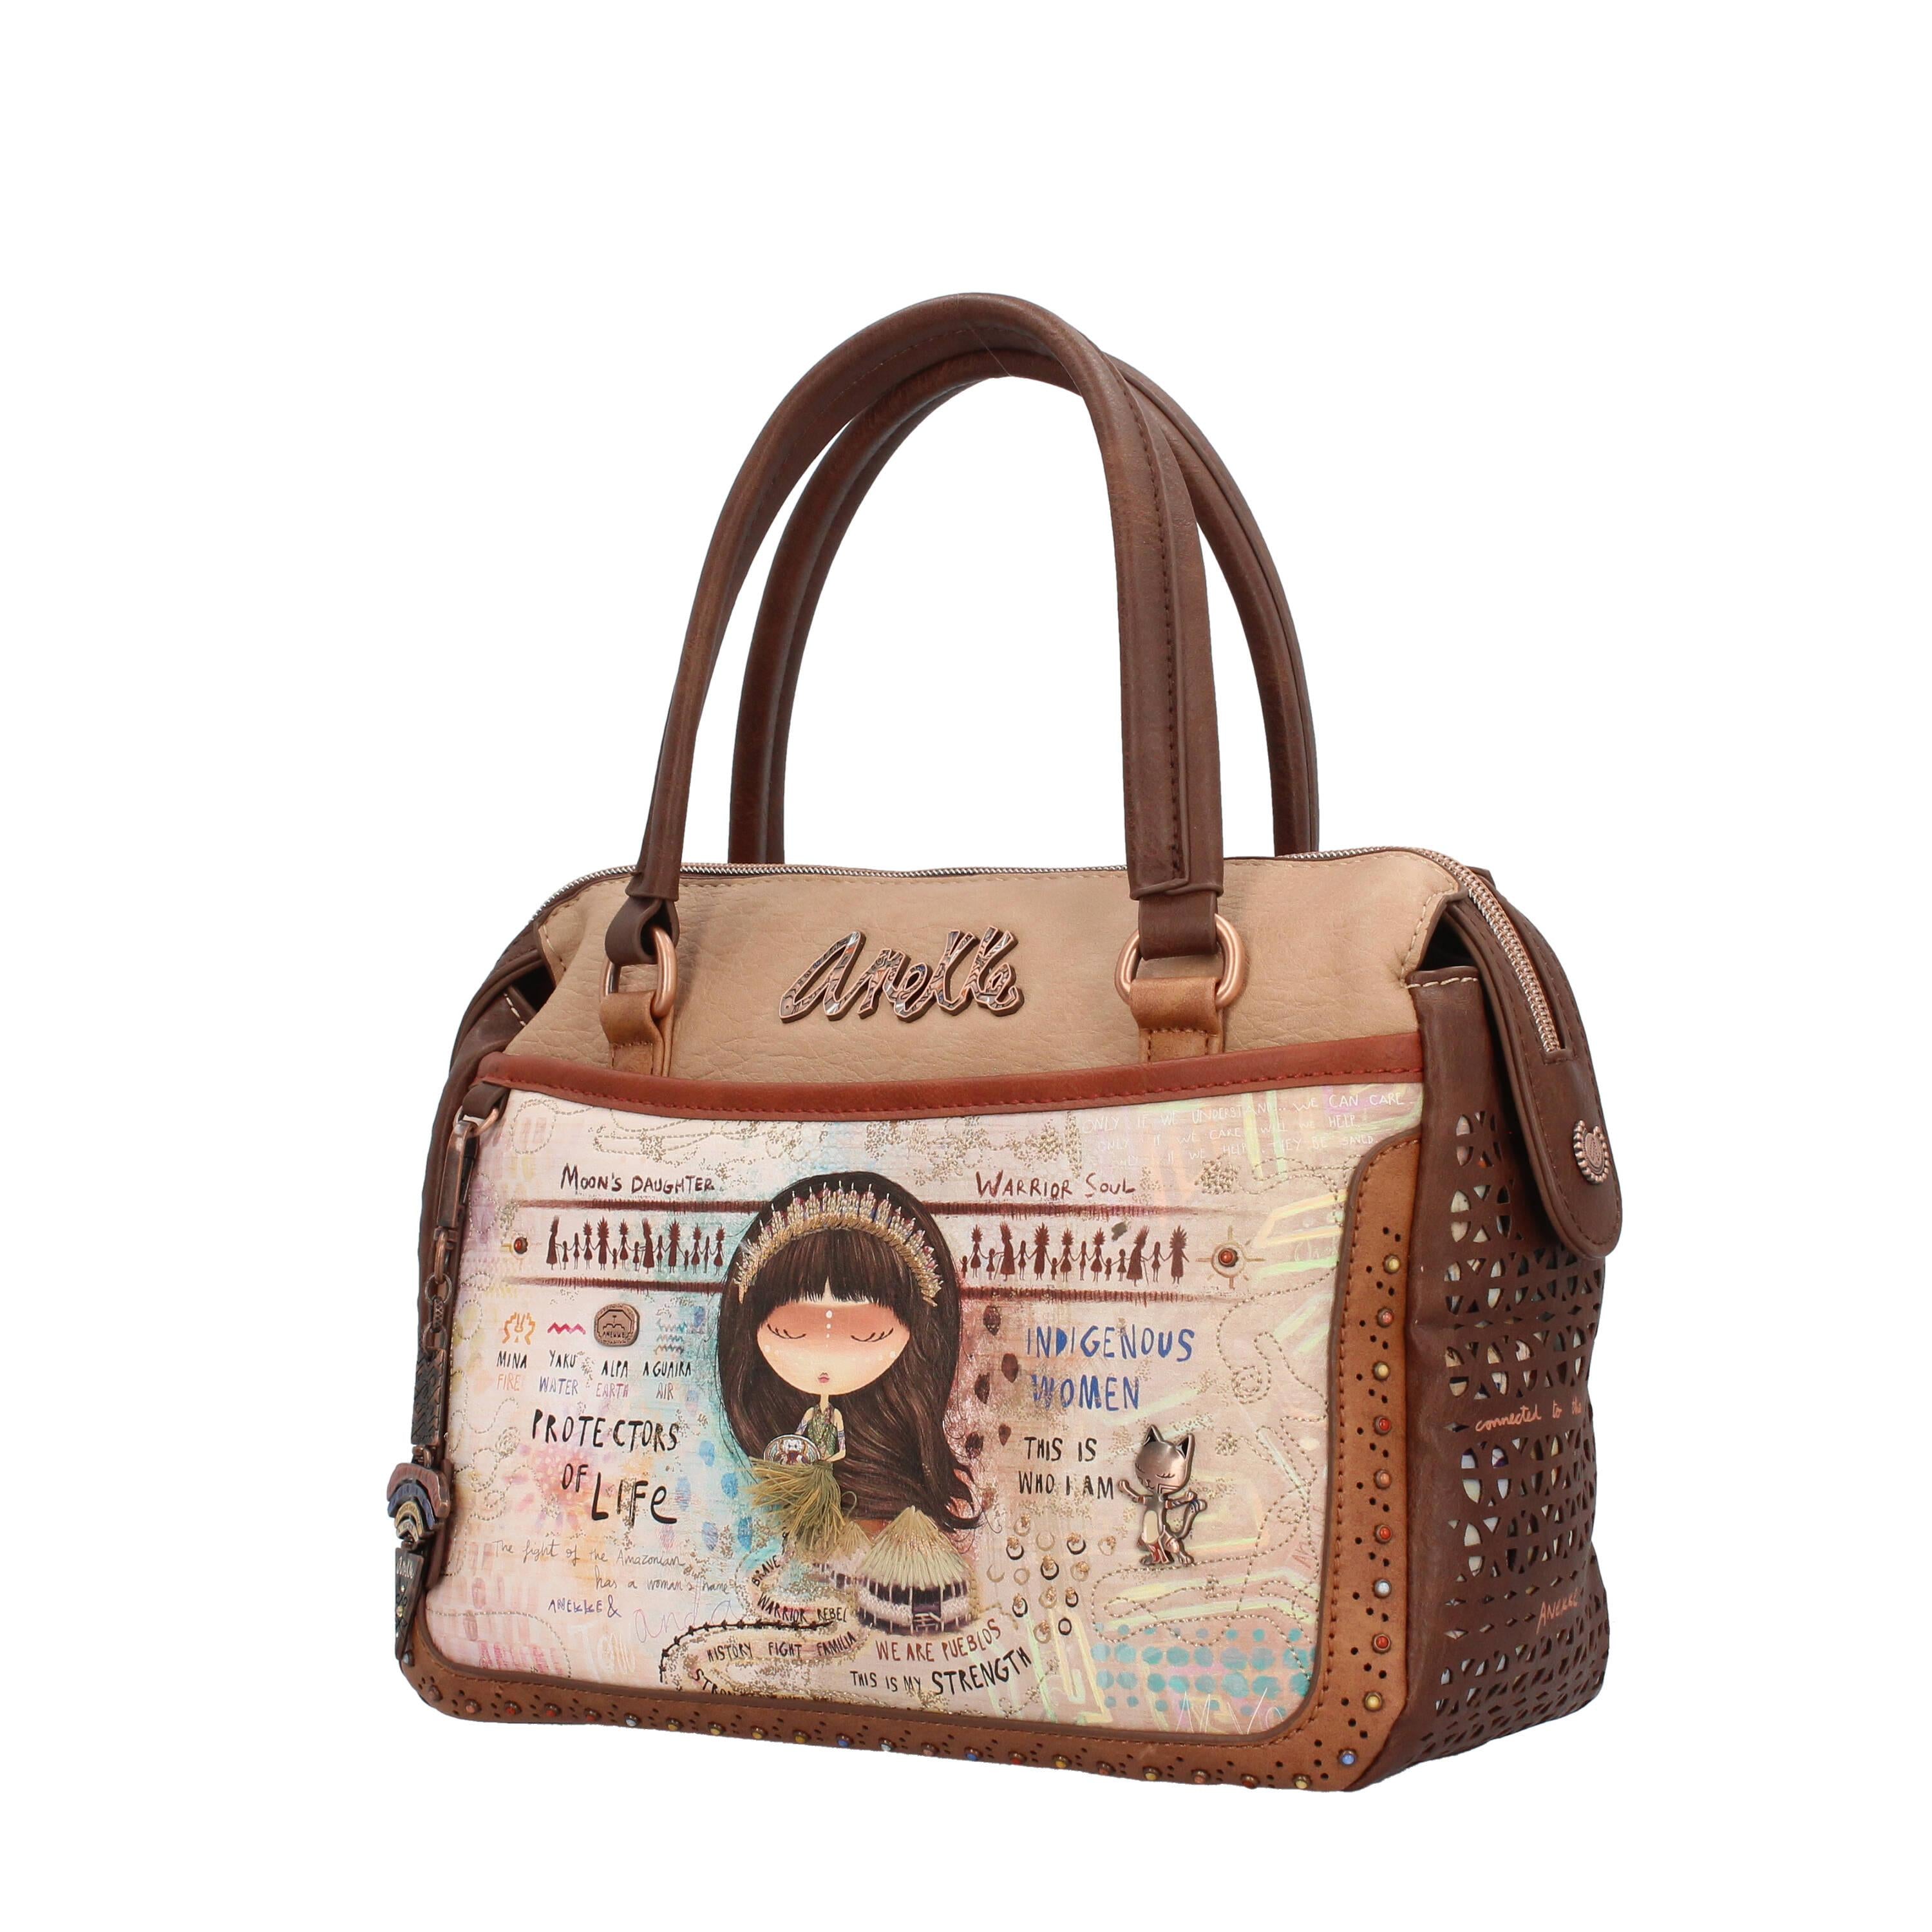 Borsa a mano in similpelle